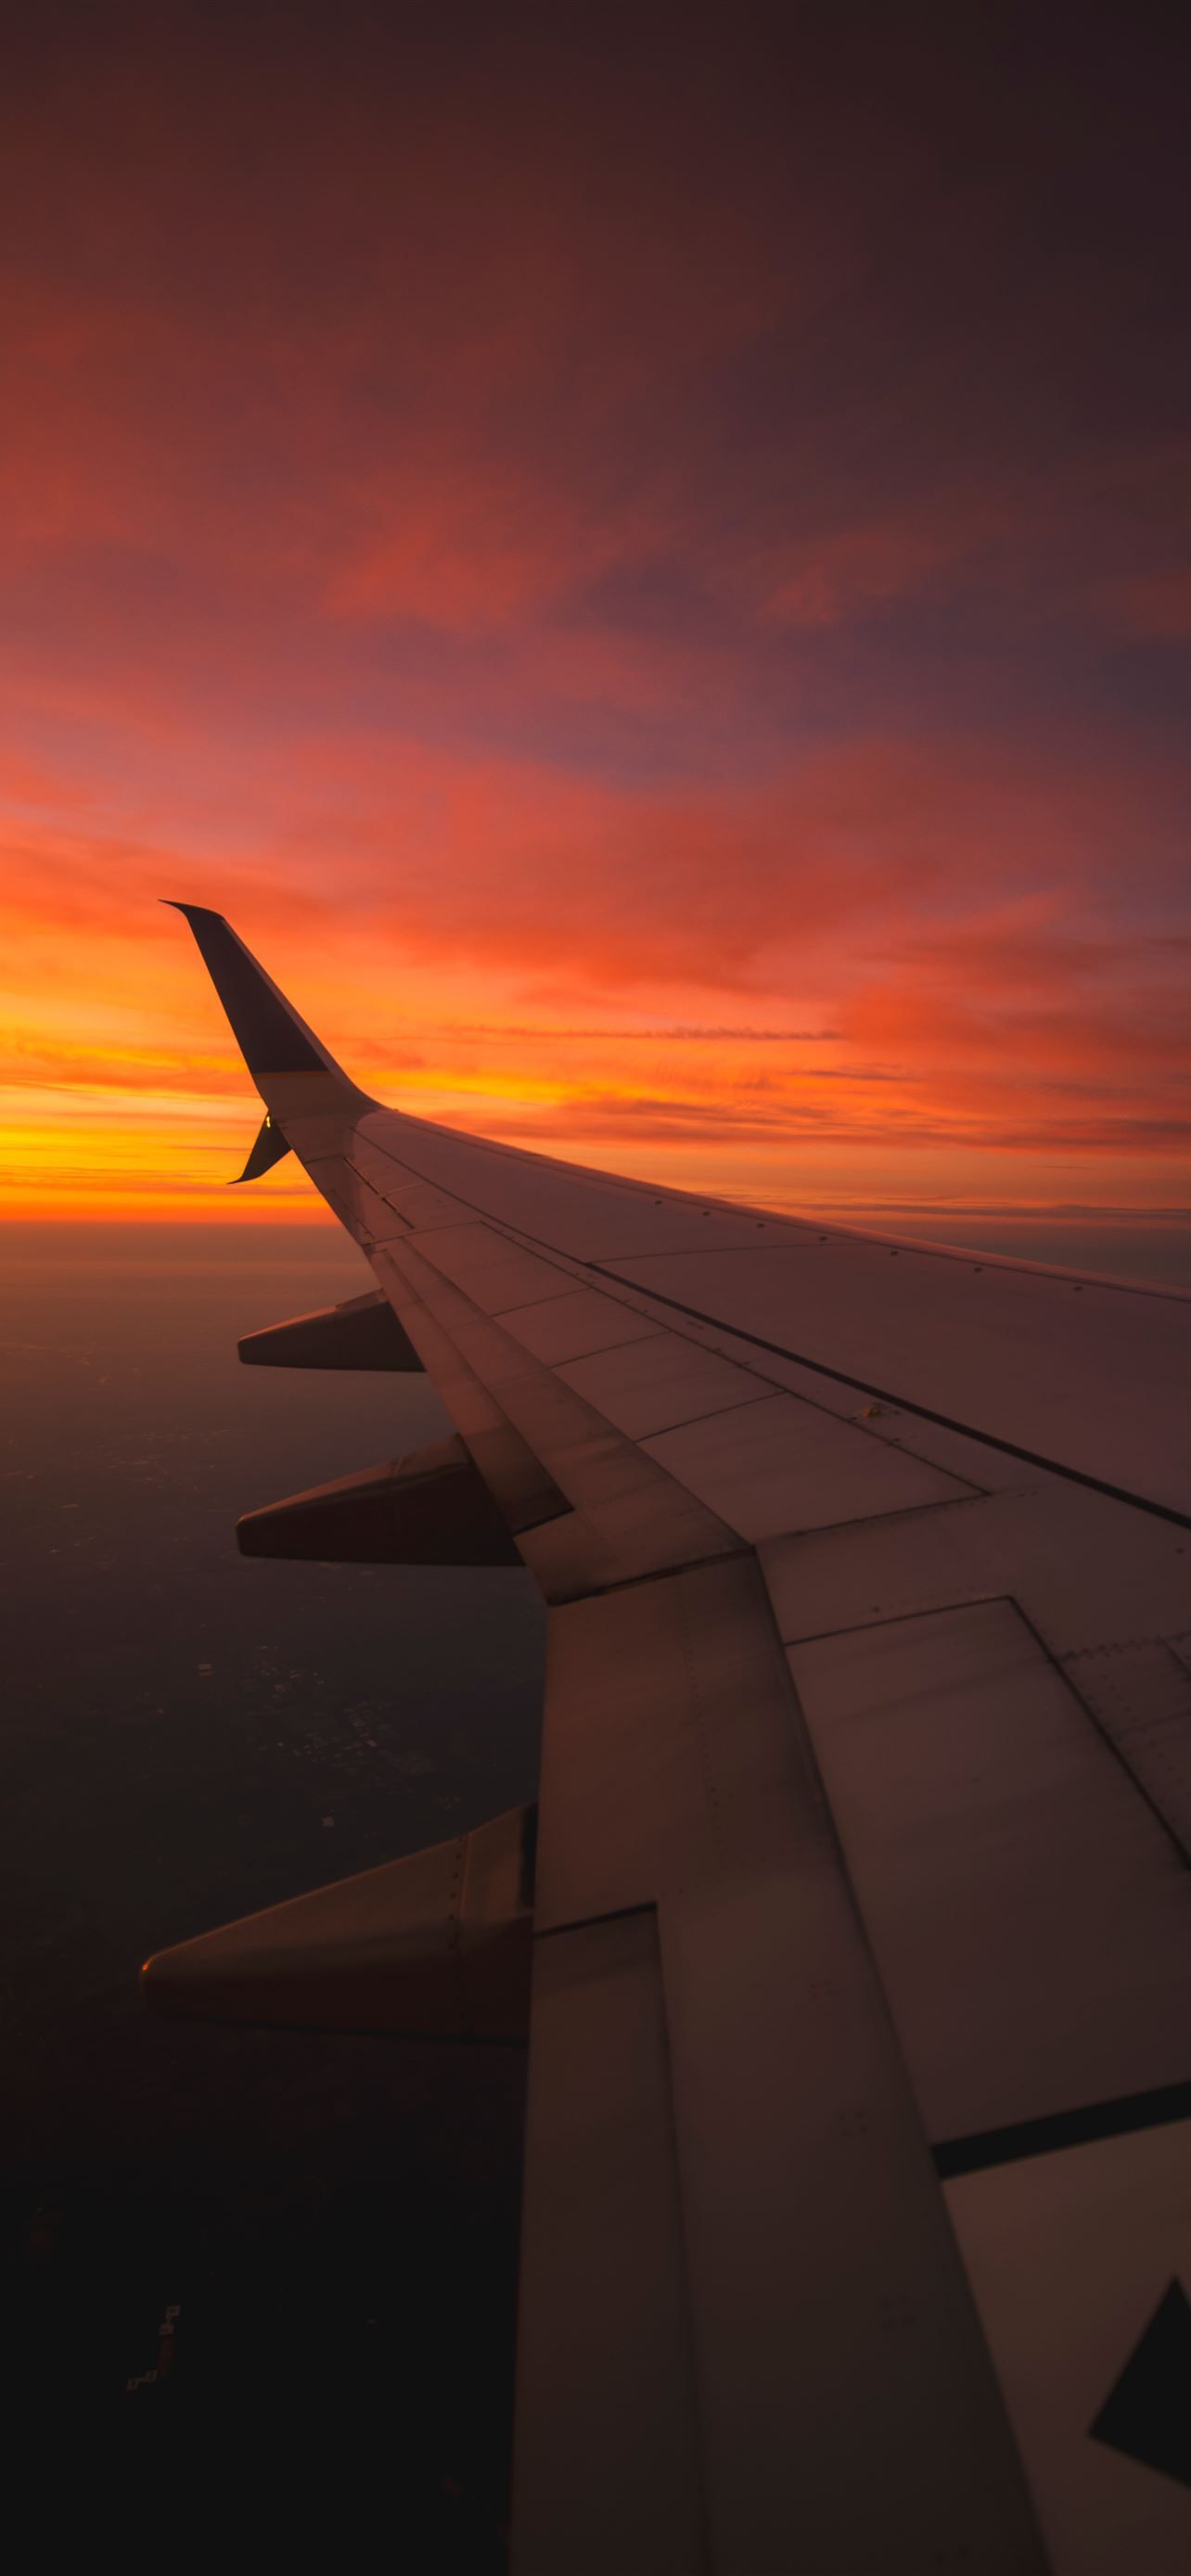 Sunset View From the Window of an Airplane iPhone Wallpaper Free Download